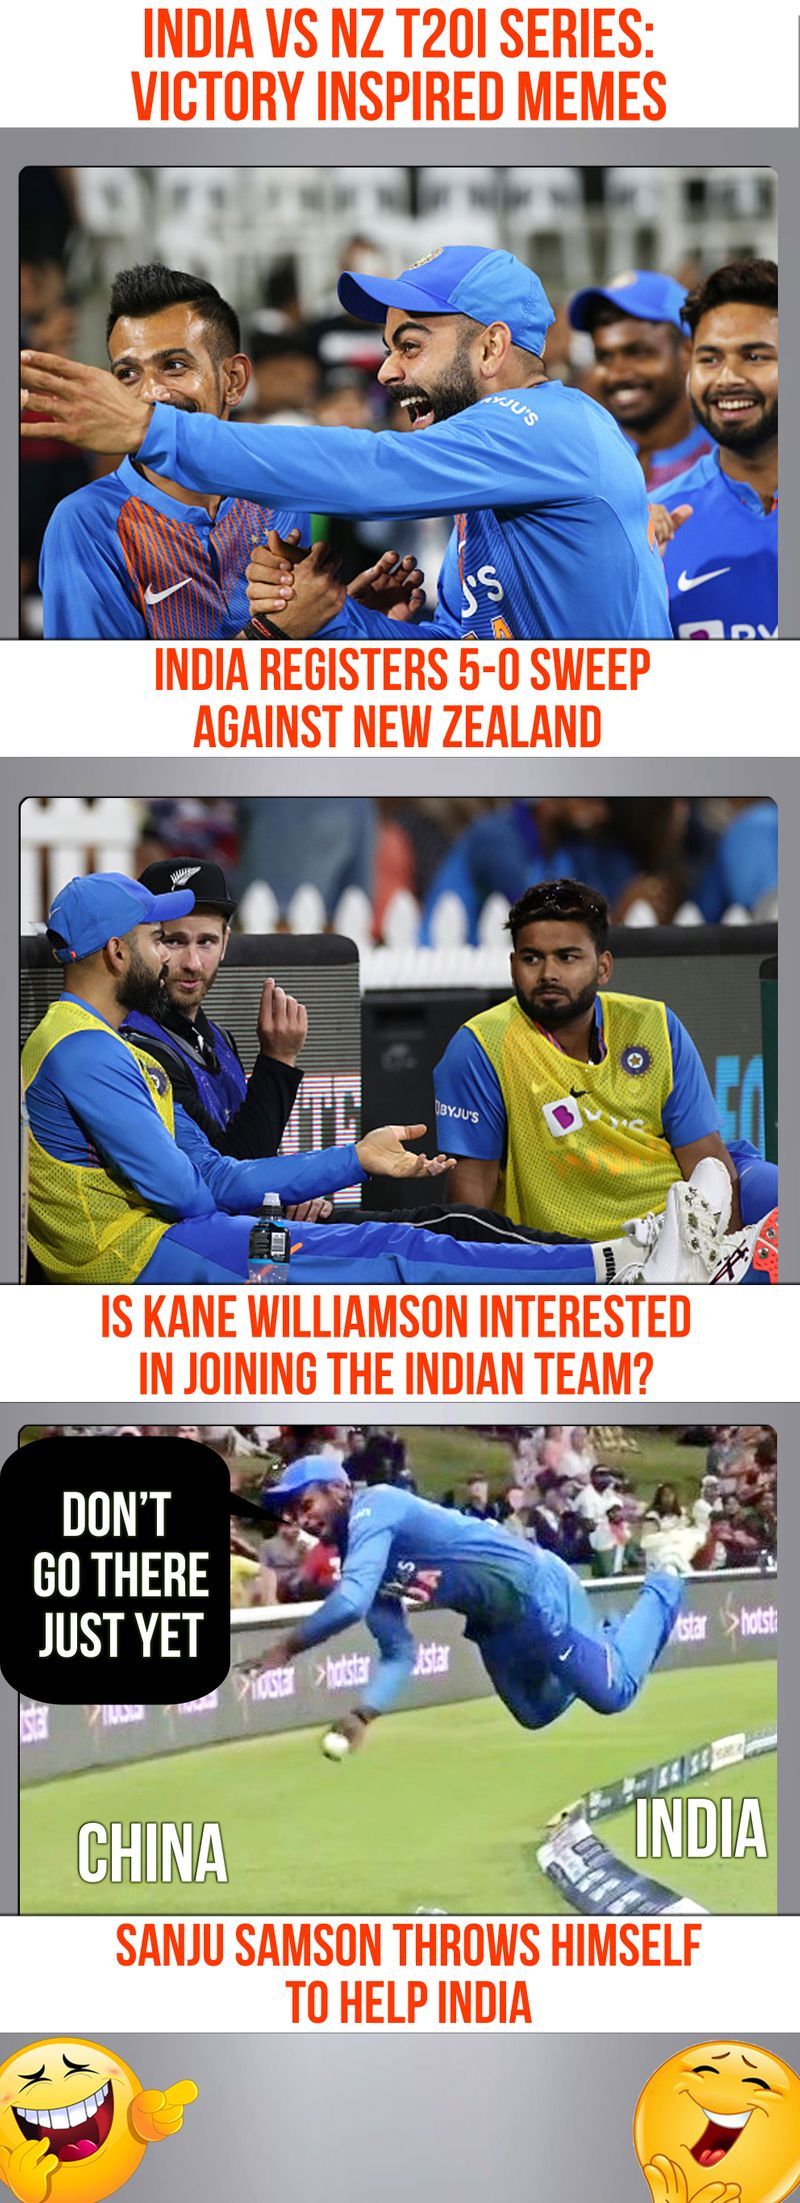 India vs New Zealand T20I series Winners see the funny side